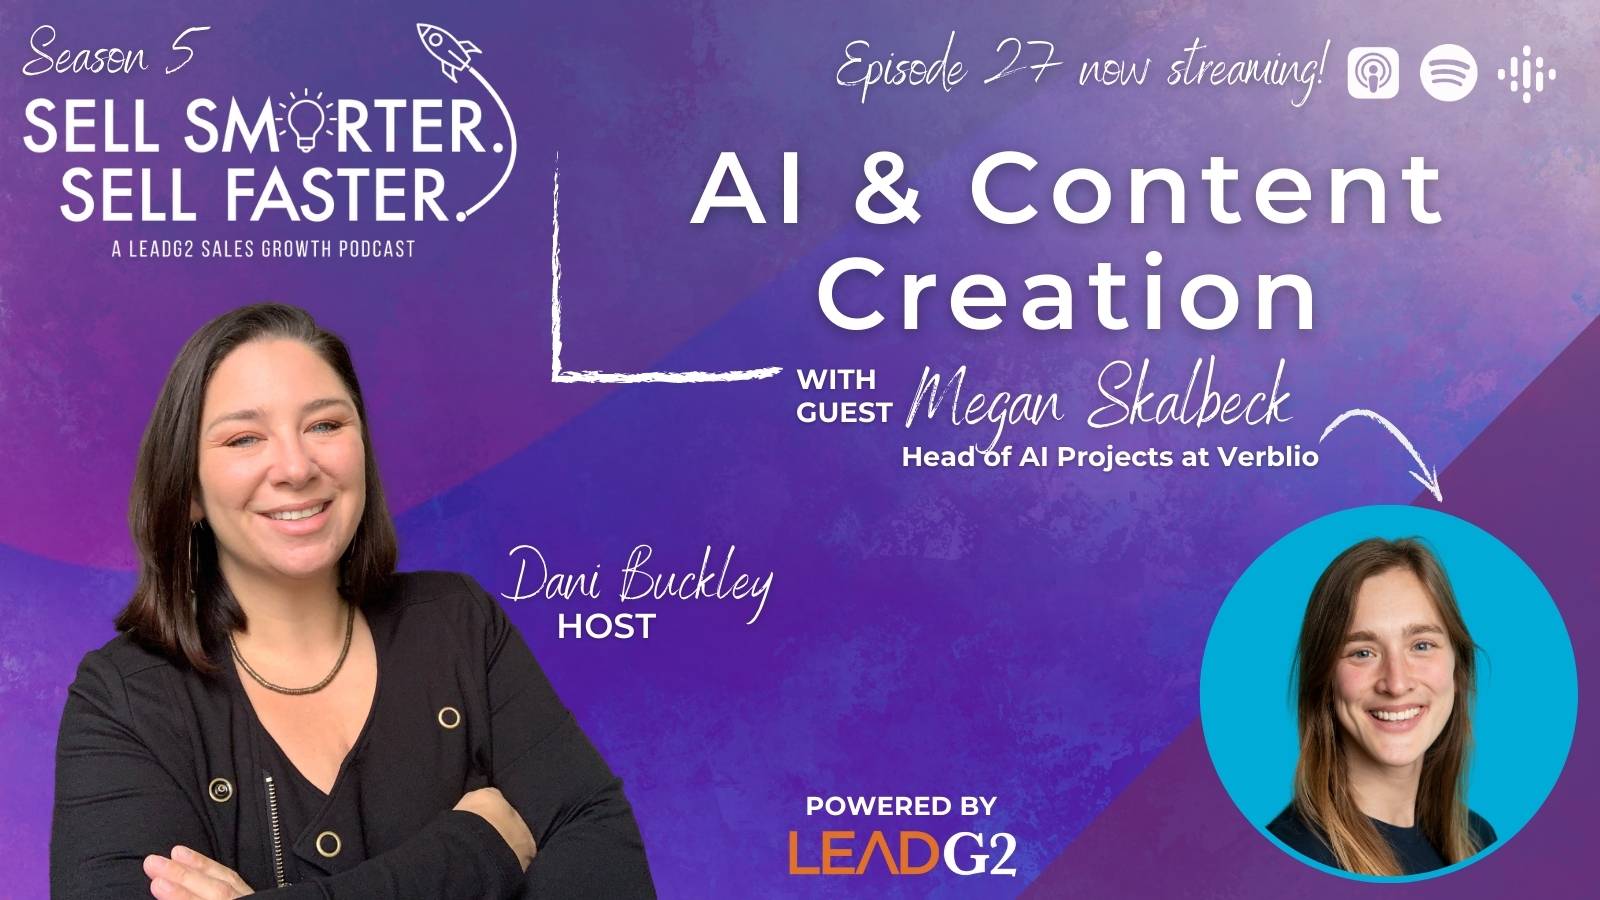 Sell Smarter. Sell Faster. Podcast - Ep. 27 - Artificial Intelligence (AI) & Content Creation